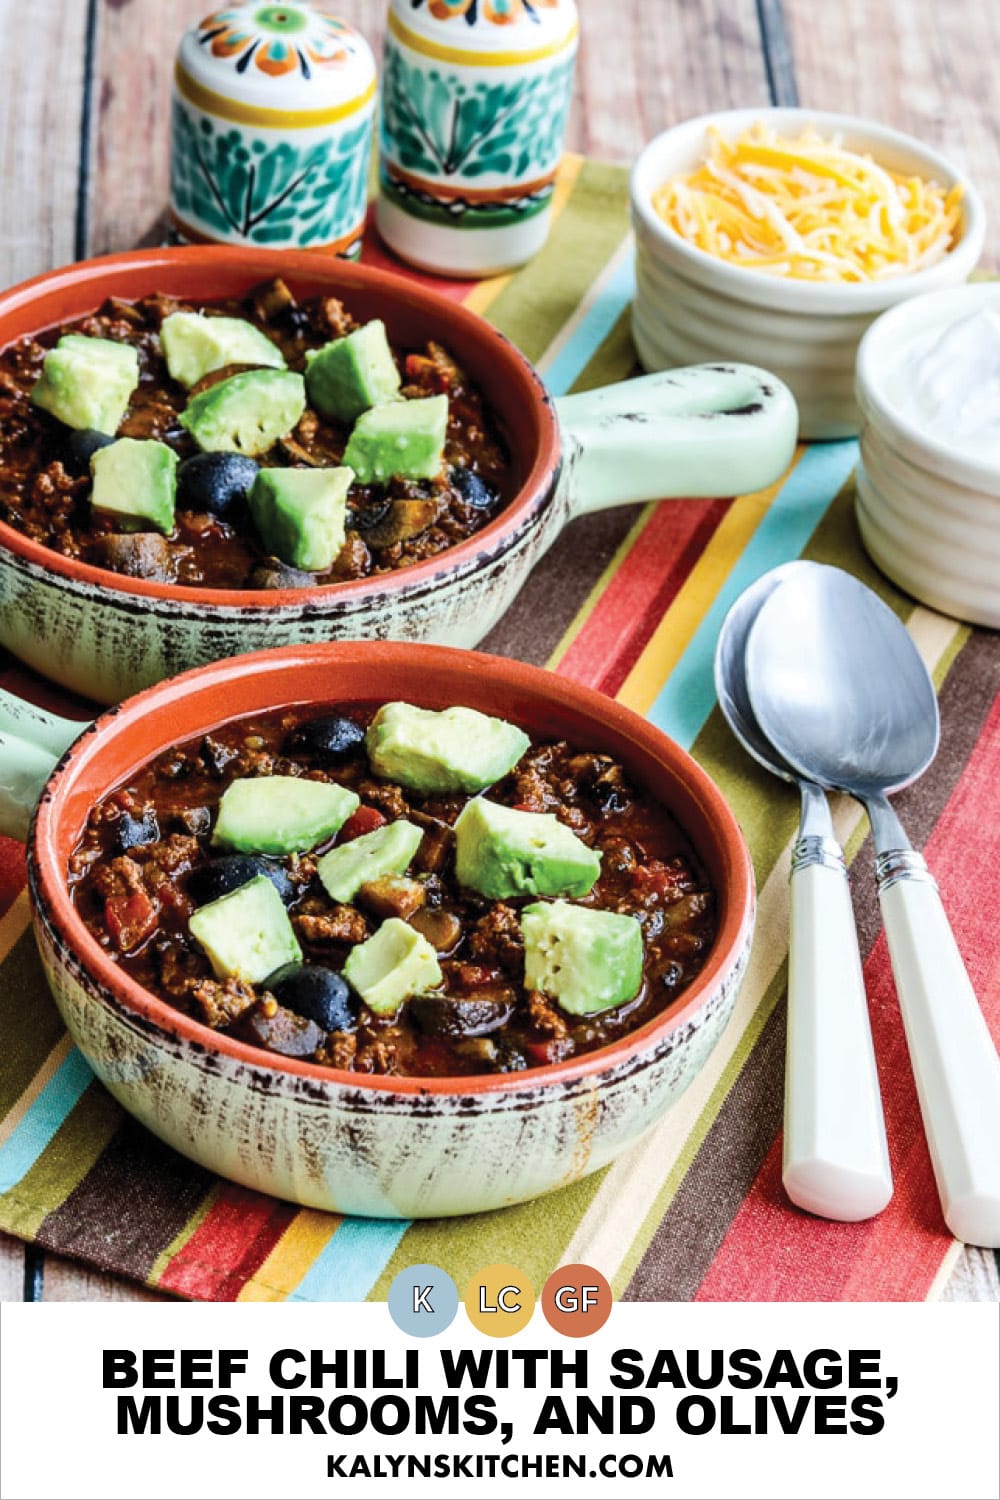 Pinterest image of Beef Chili with Sausage, Mushrooms, and Olives